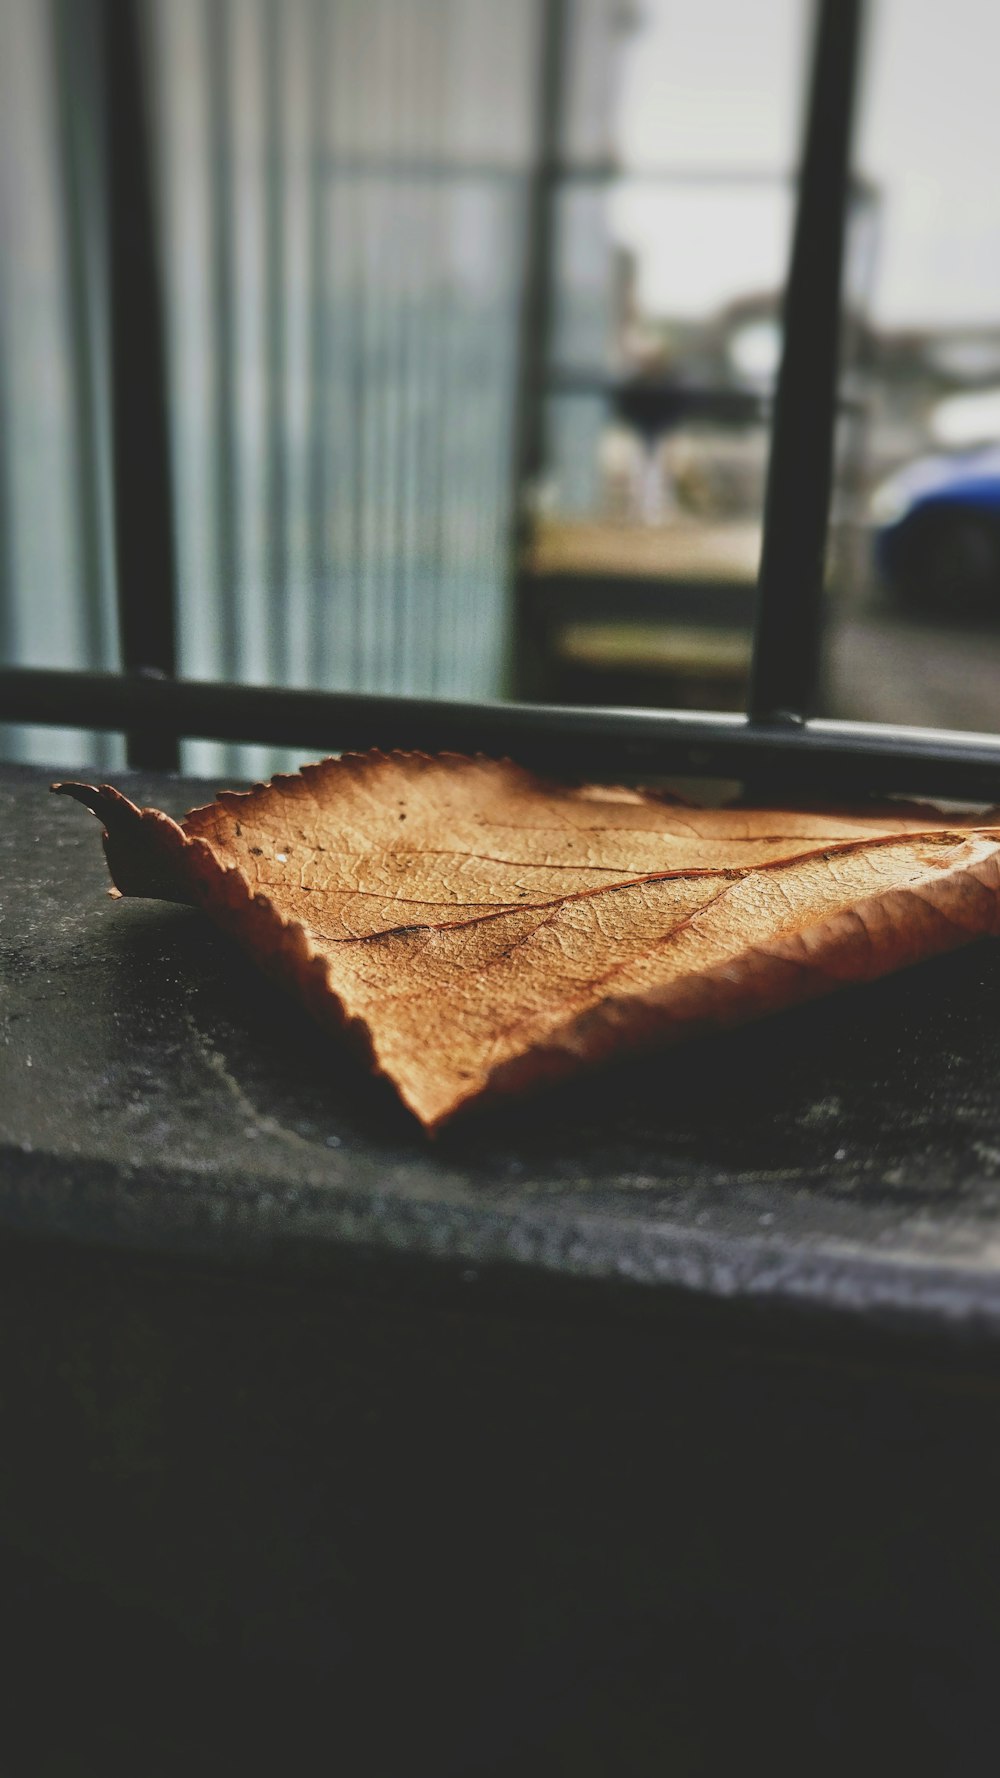 A large leaf sitting at the bottom of a window.